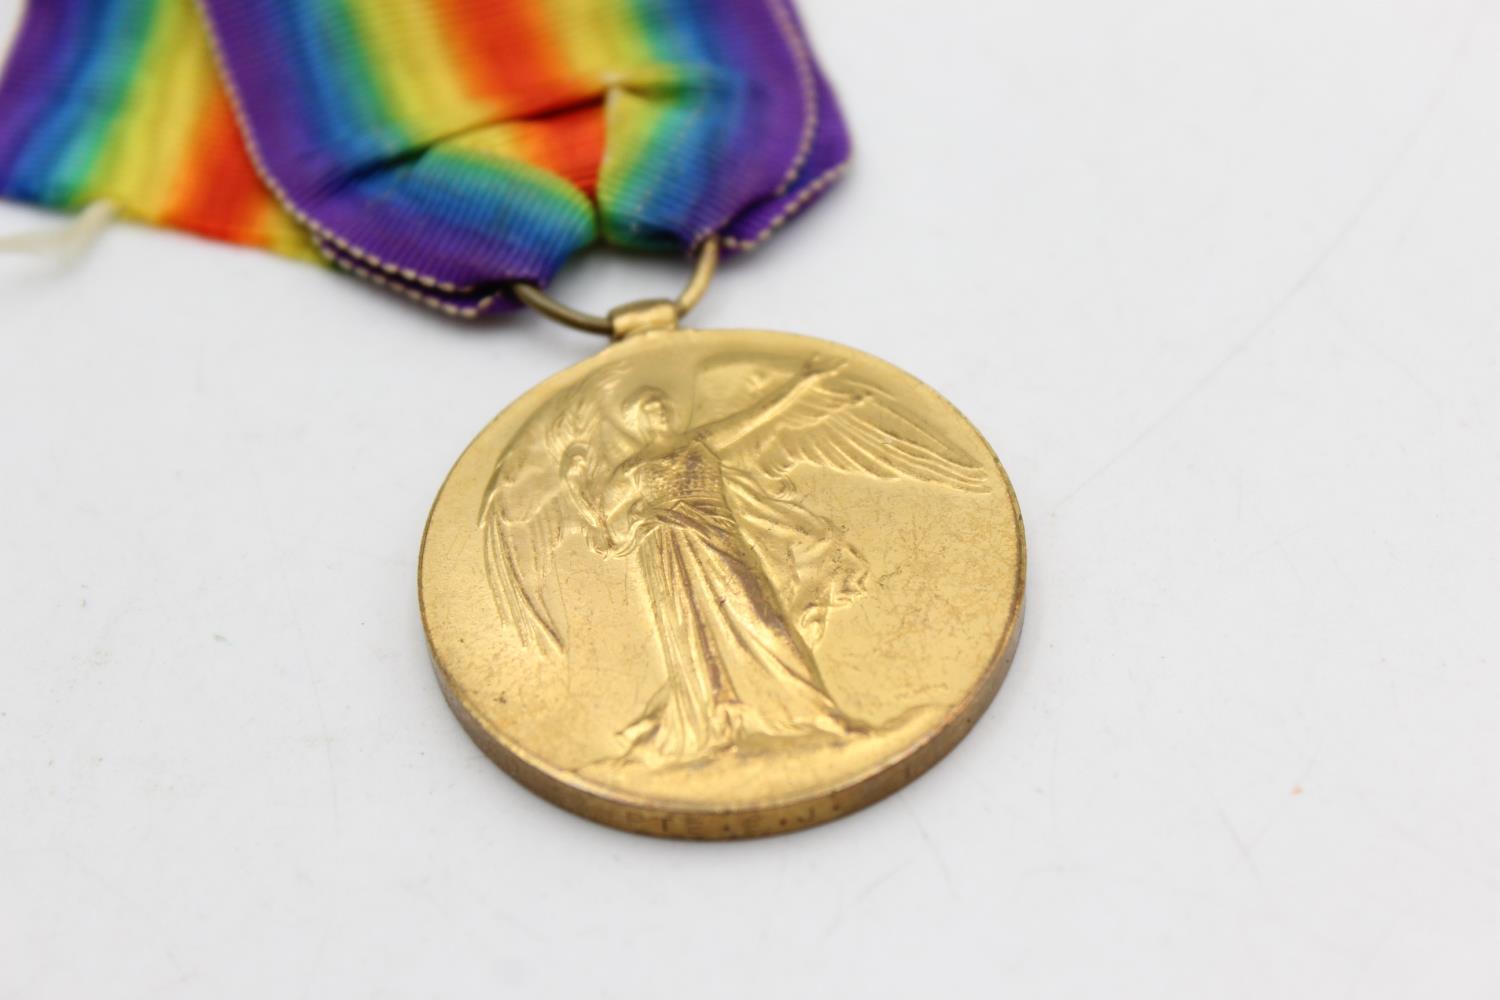 3 x WW1 Medals Named Inc War, Victory Etc Inc War To 48797 Pte D. Driscall - Liverpool Regiment, - Image 6 of 8